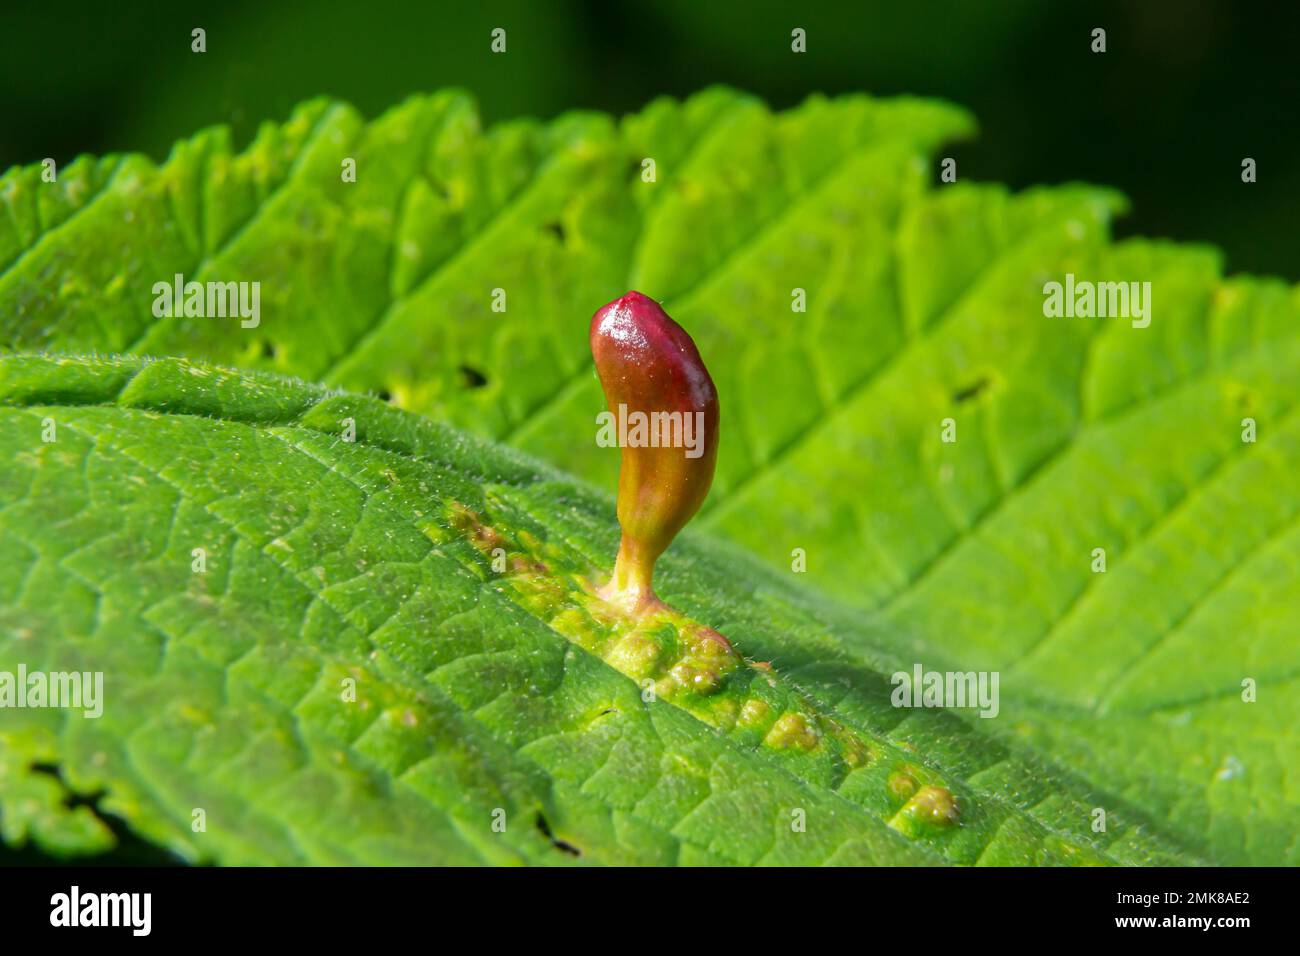 Parasitic plants on the leaves of lime trees. Tubular growths on the leaves of the Linden tree. Stock Photo